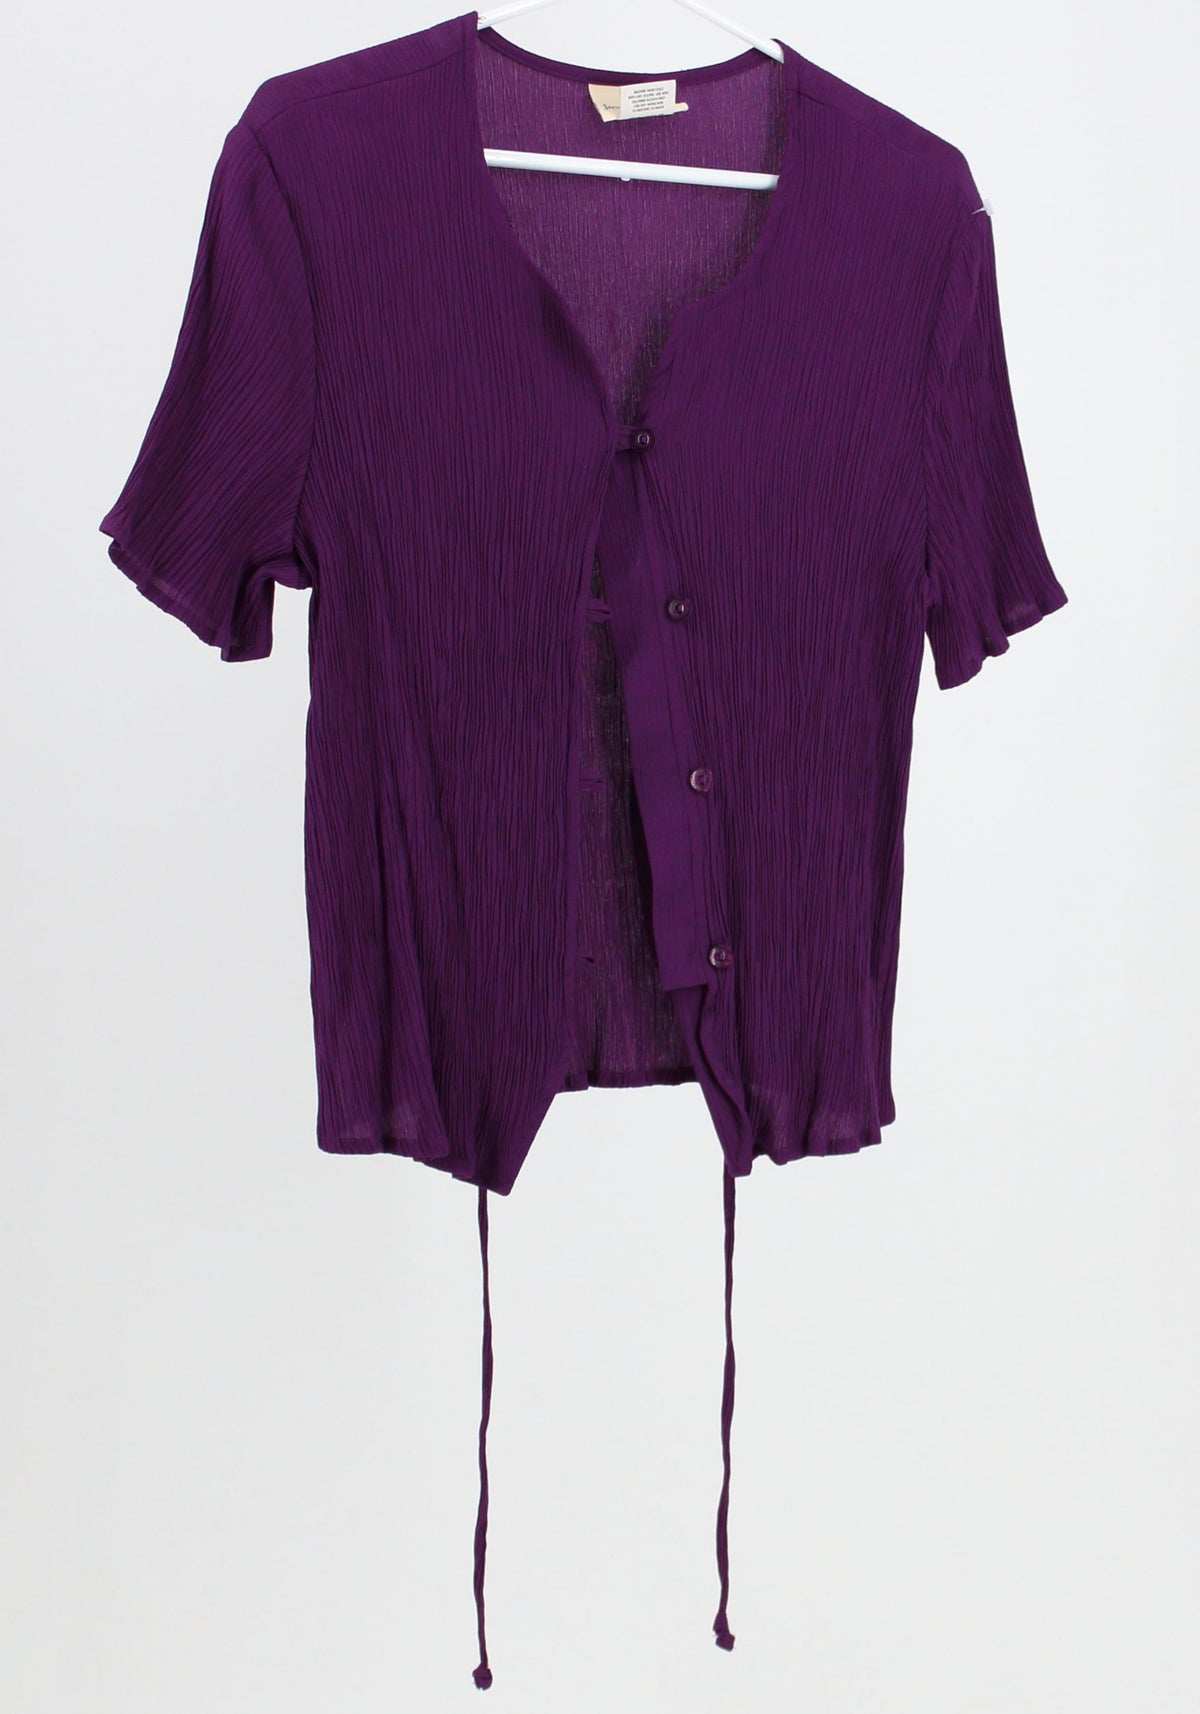 Jaclyn Smith purple short sleeve button up cardigan